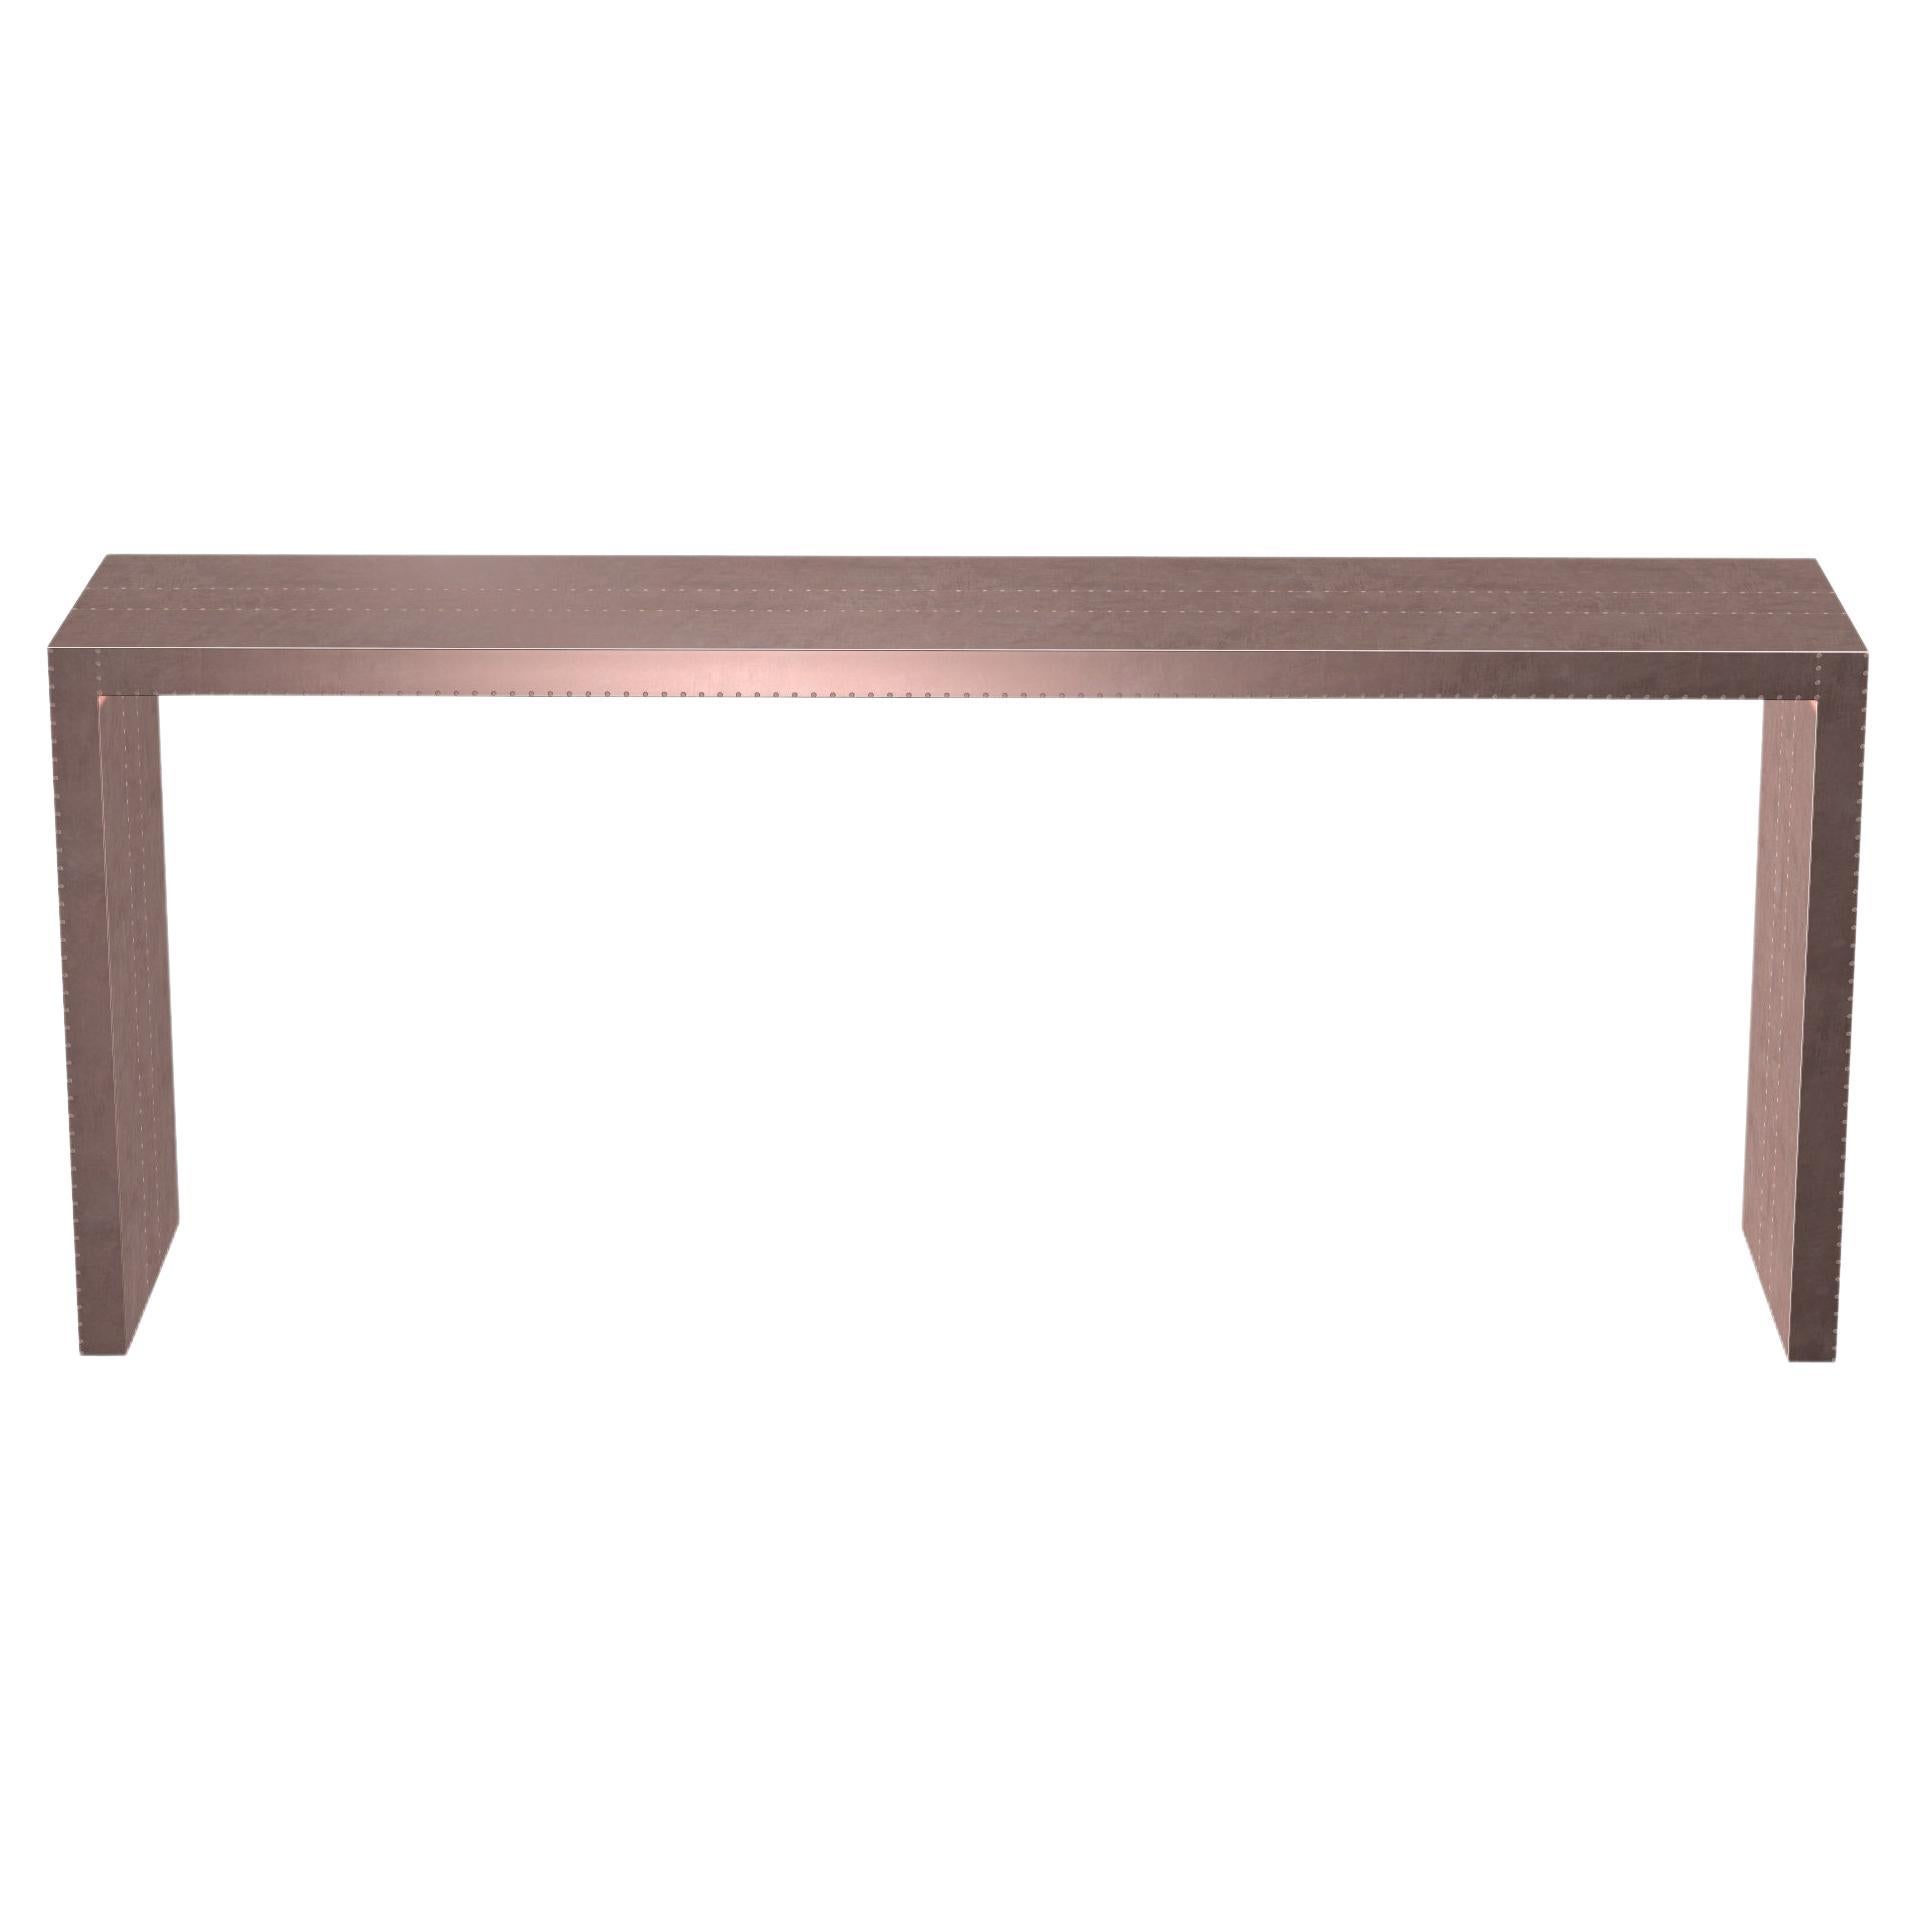 Art Deco Card Tables and Tea Tables Rectangular Console in Smooth Copper  For Sale